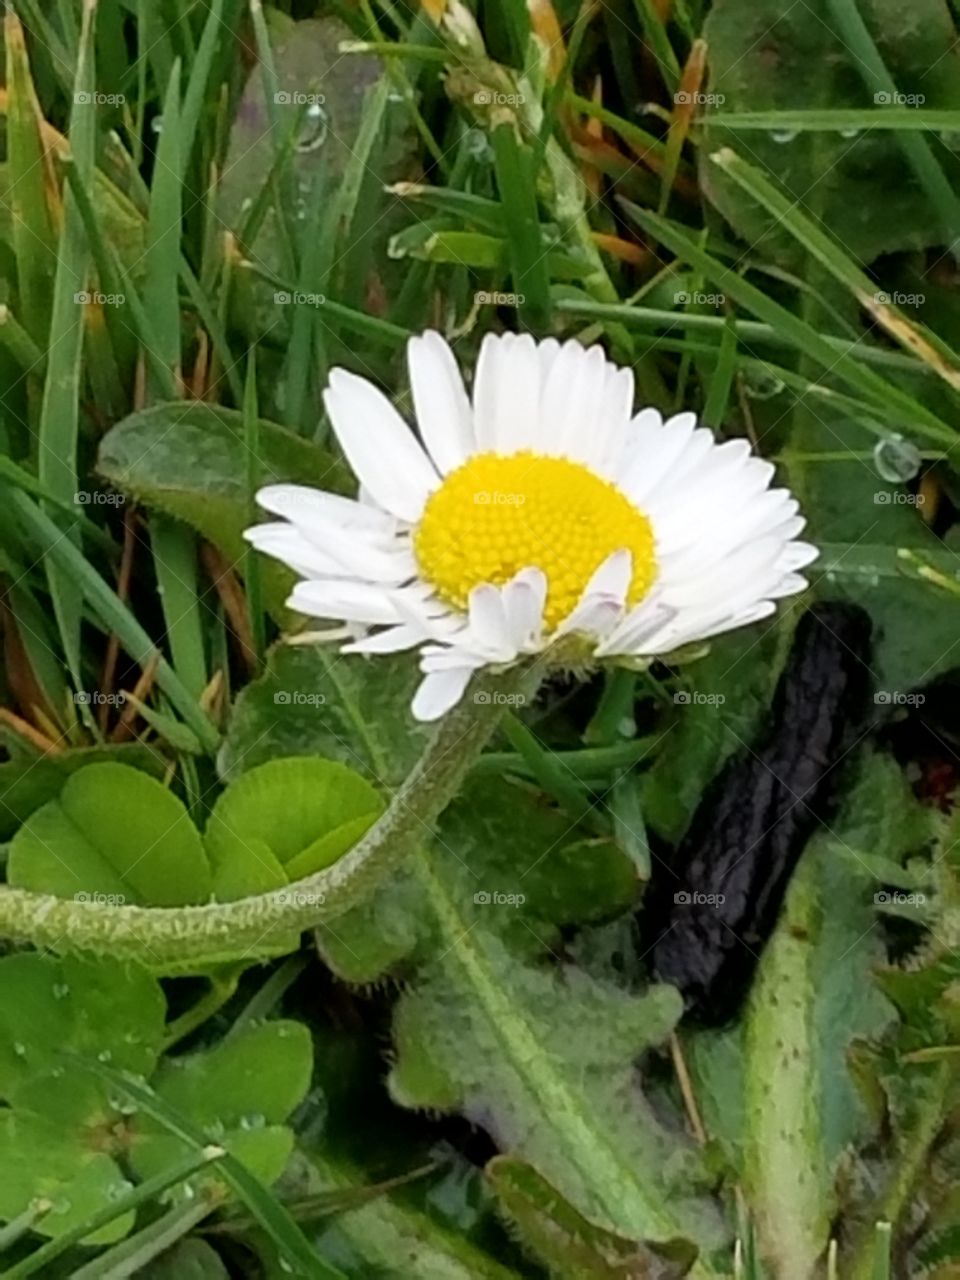 Tiny white and yellow flower.